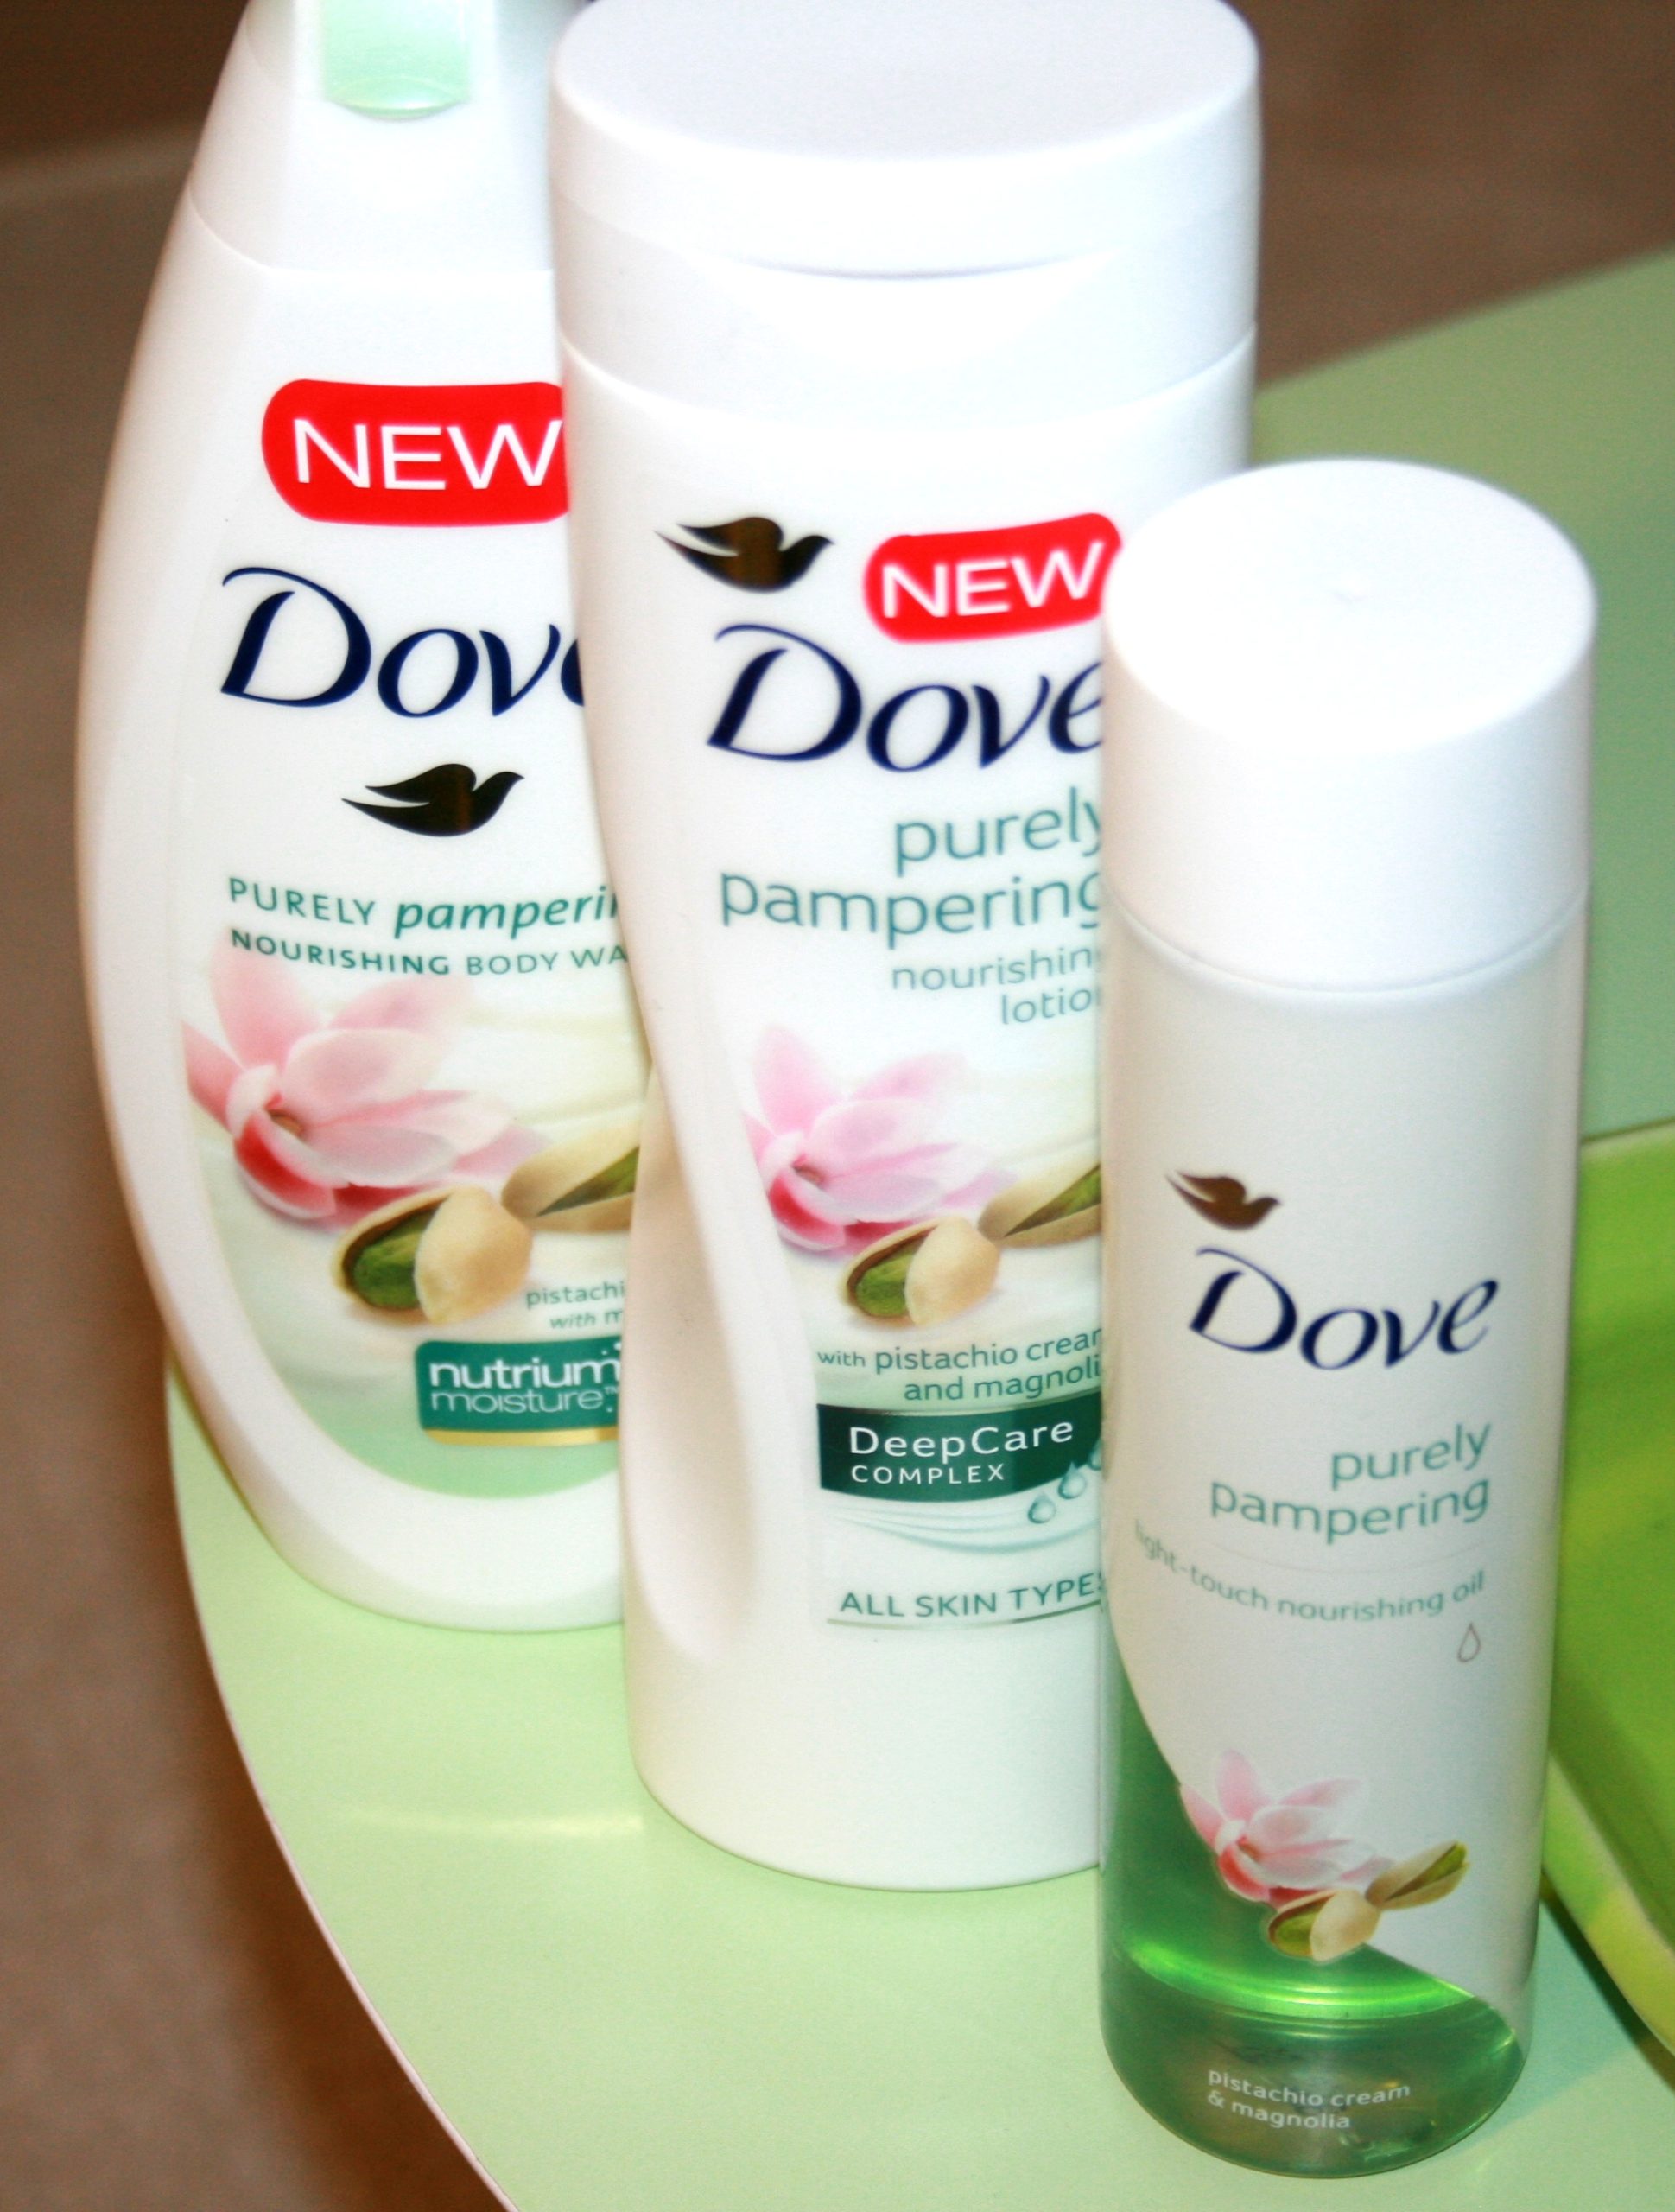 New from Dove